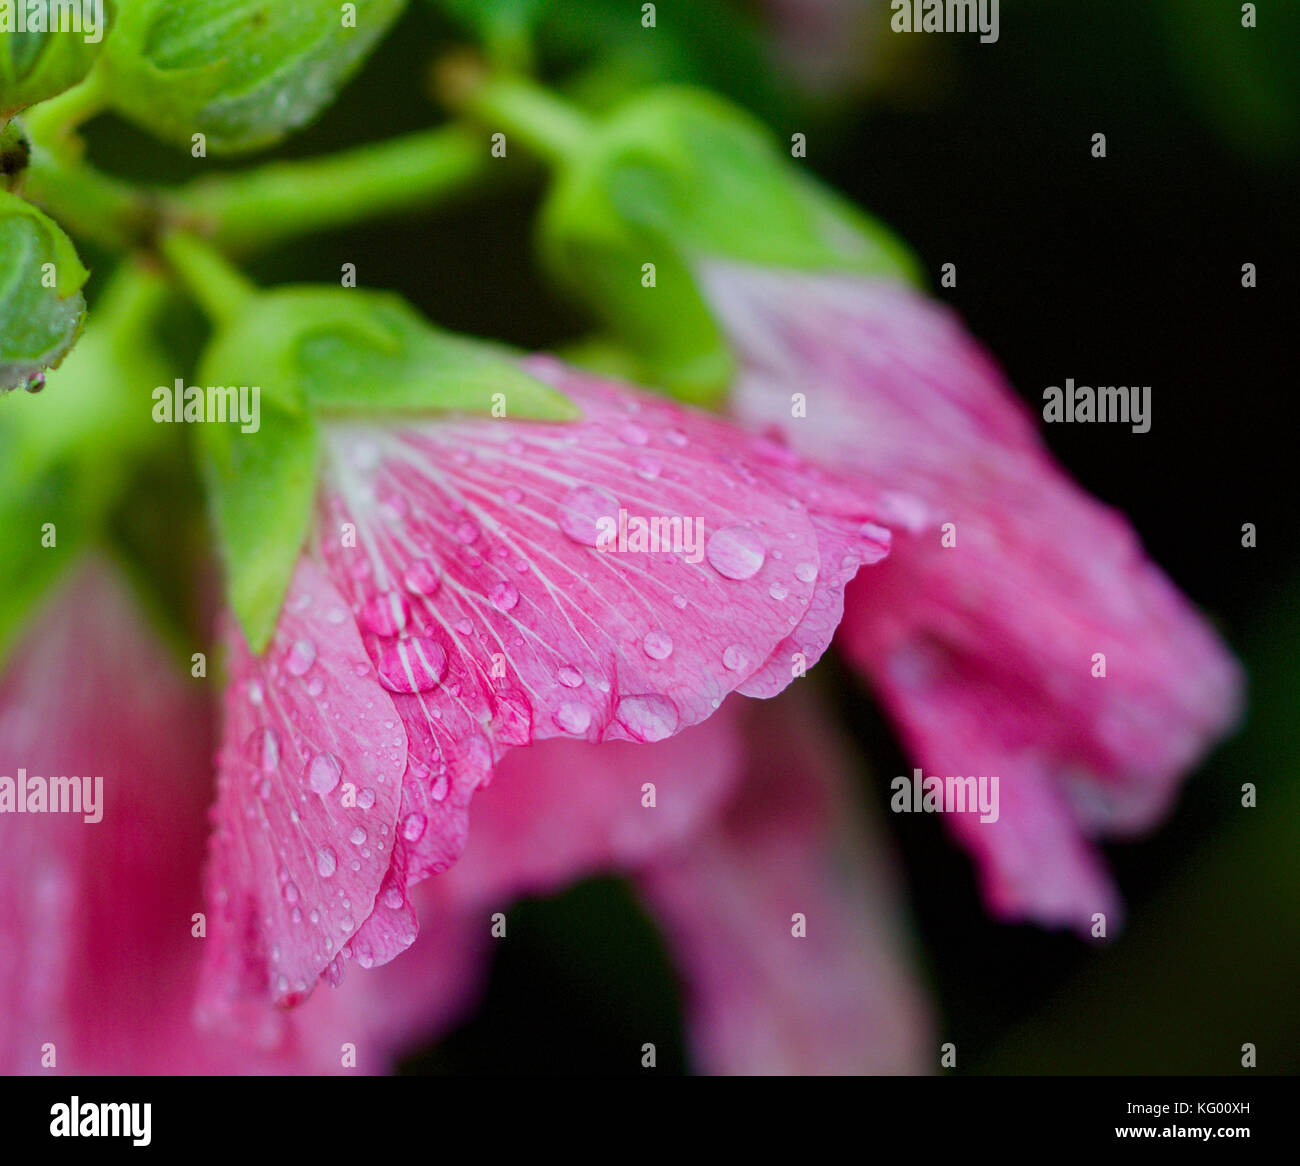 Water droplets on a hollyhock Stock Photo